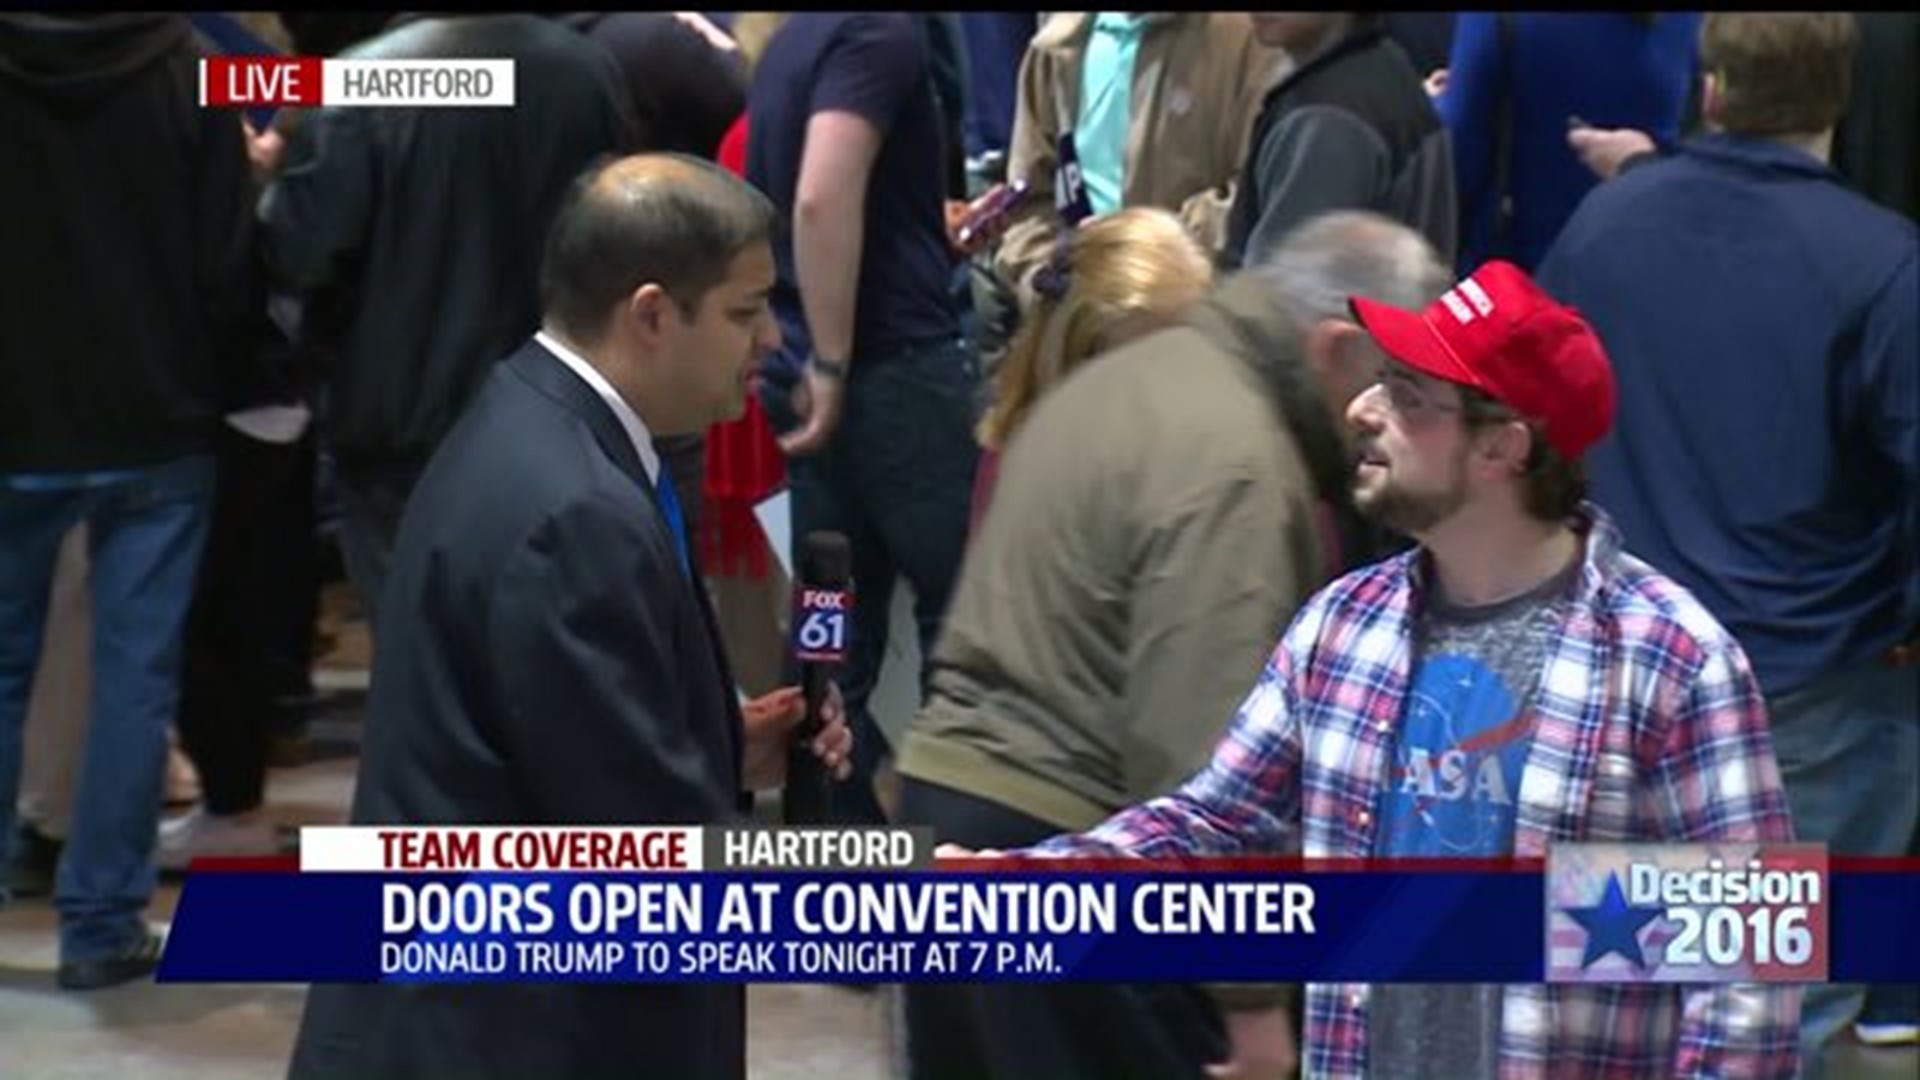 Trump supporters filing into Convention Center